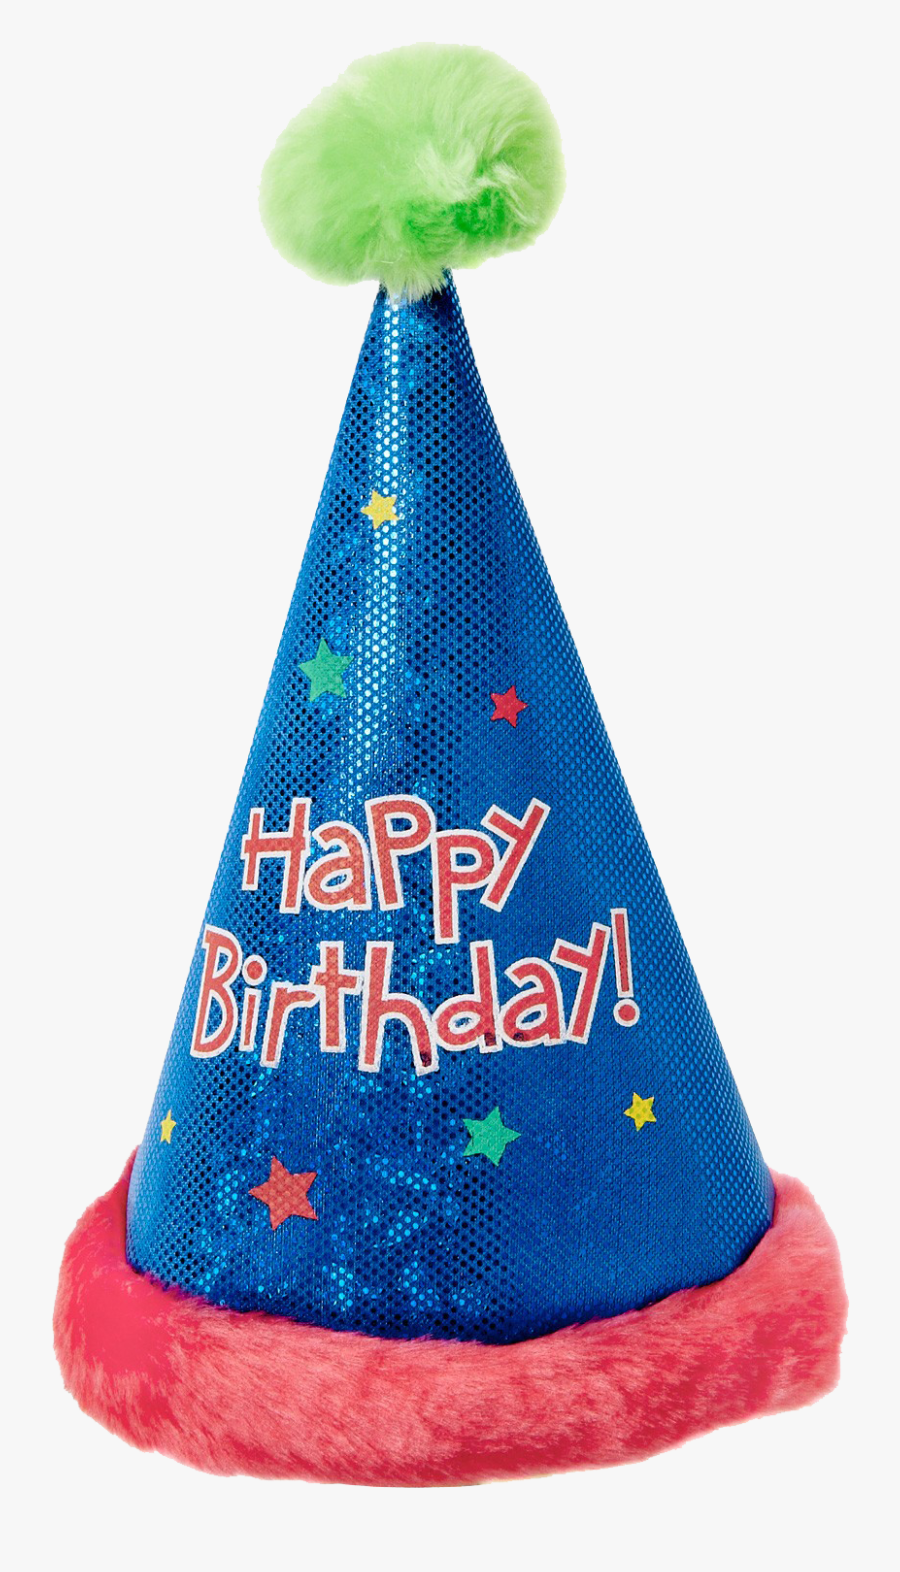 Real Birthday Hat Png, Transparent Clipart